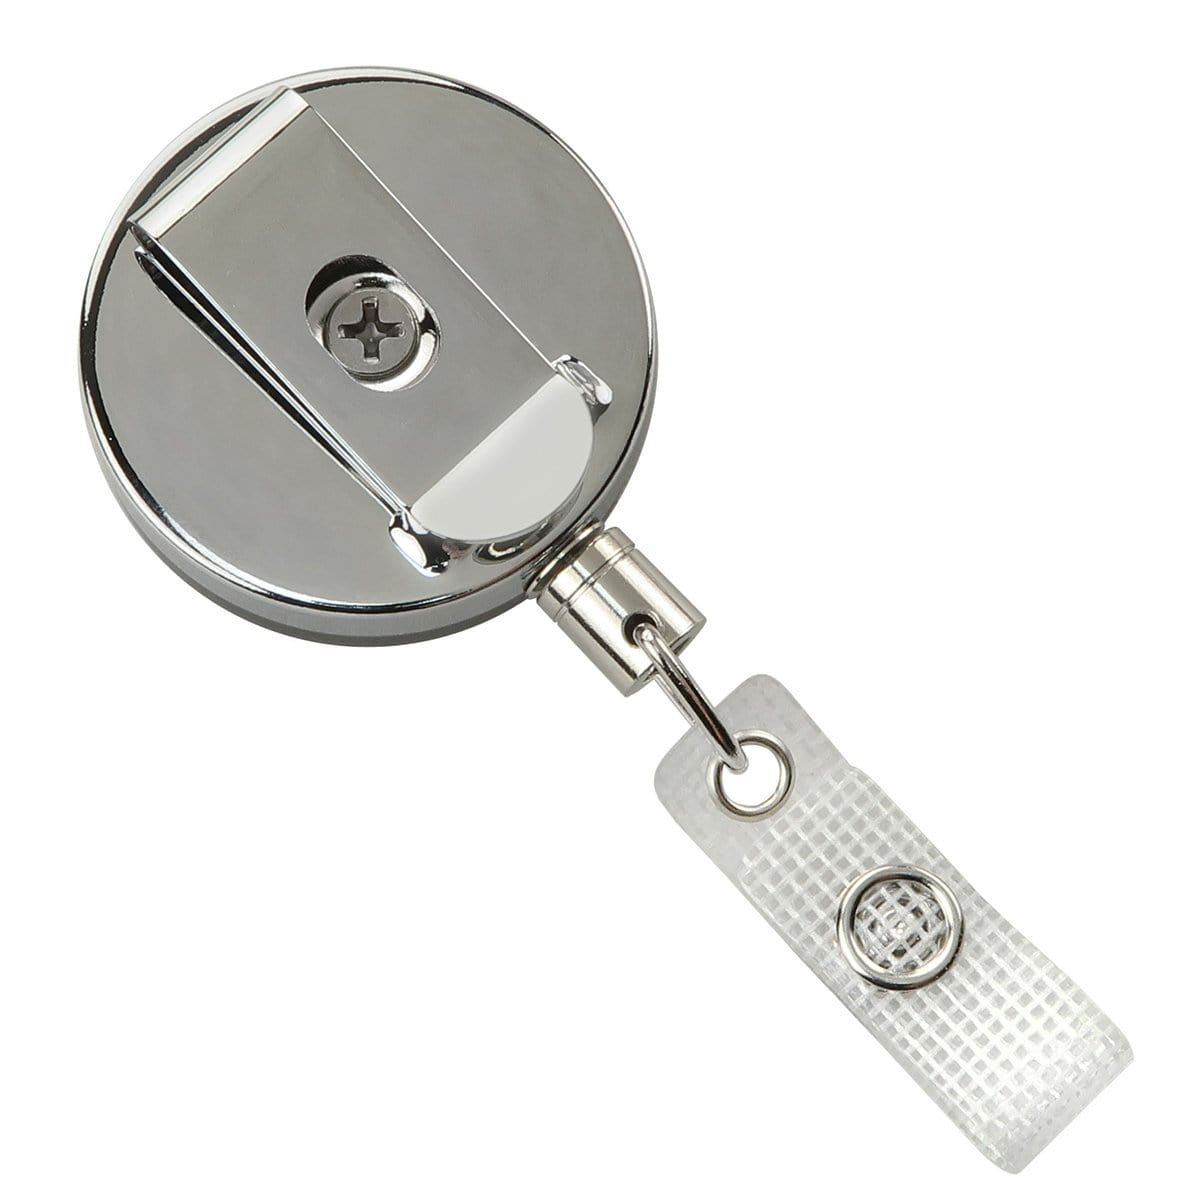 A Heavy Duty Badge Reel With Steel Cable 2120-3305 with a sturdy metal clip, a transparent plastic strap, and a durable metal snap button.